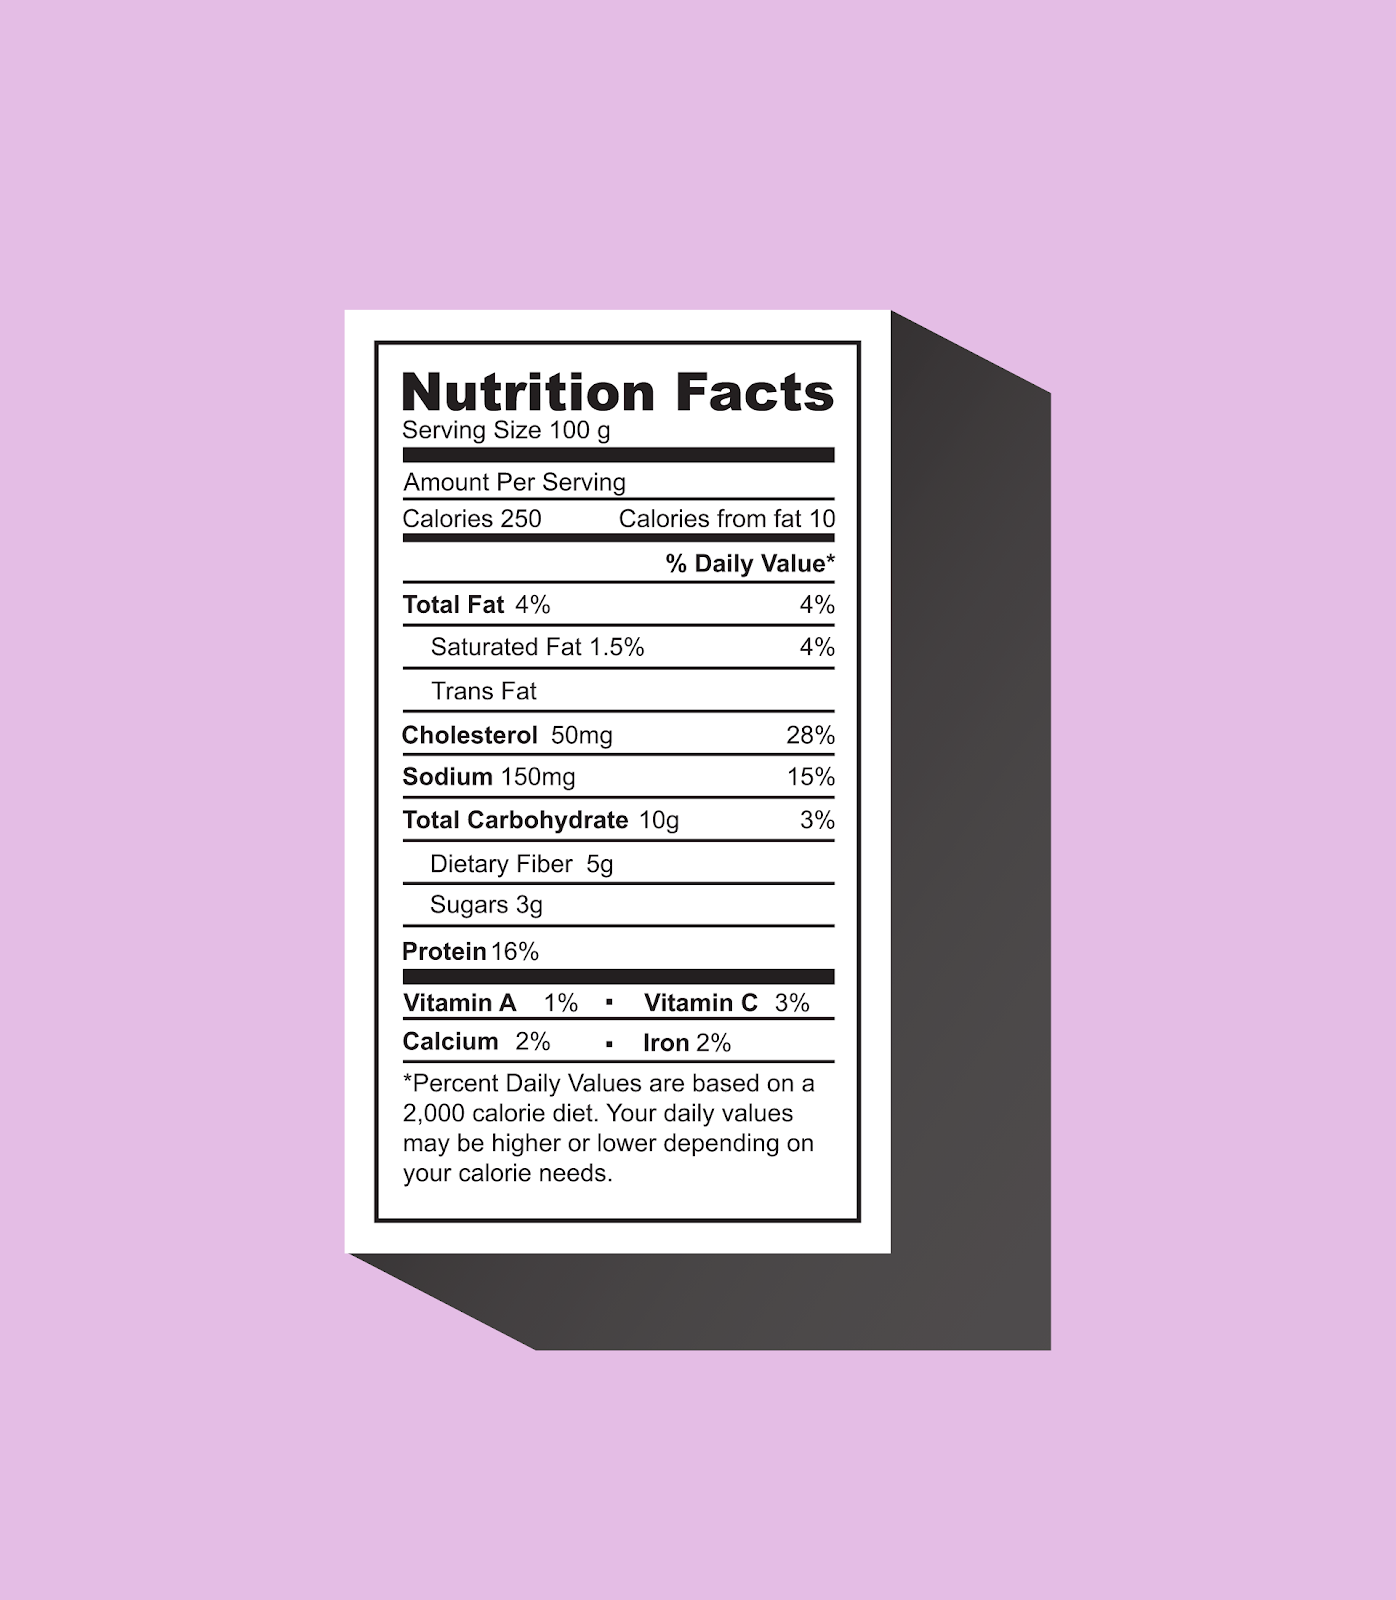 Nutrition Fact Acronyms and What They Mean